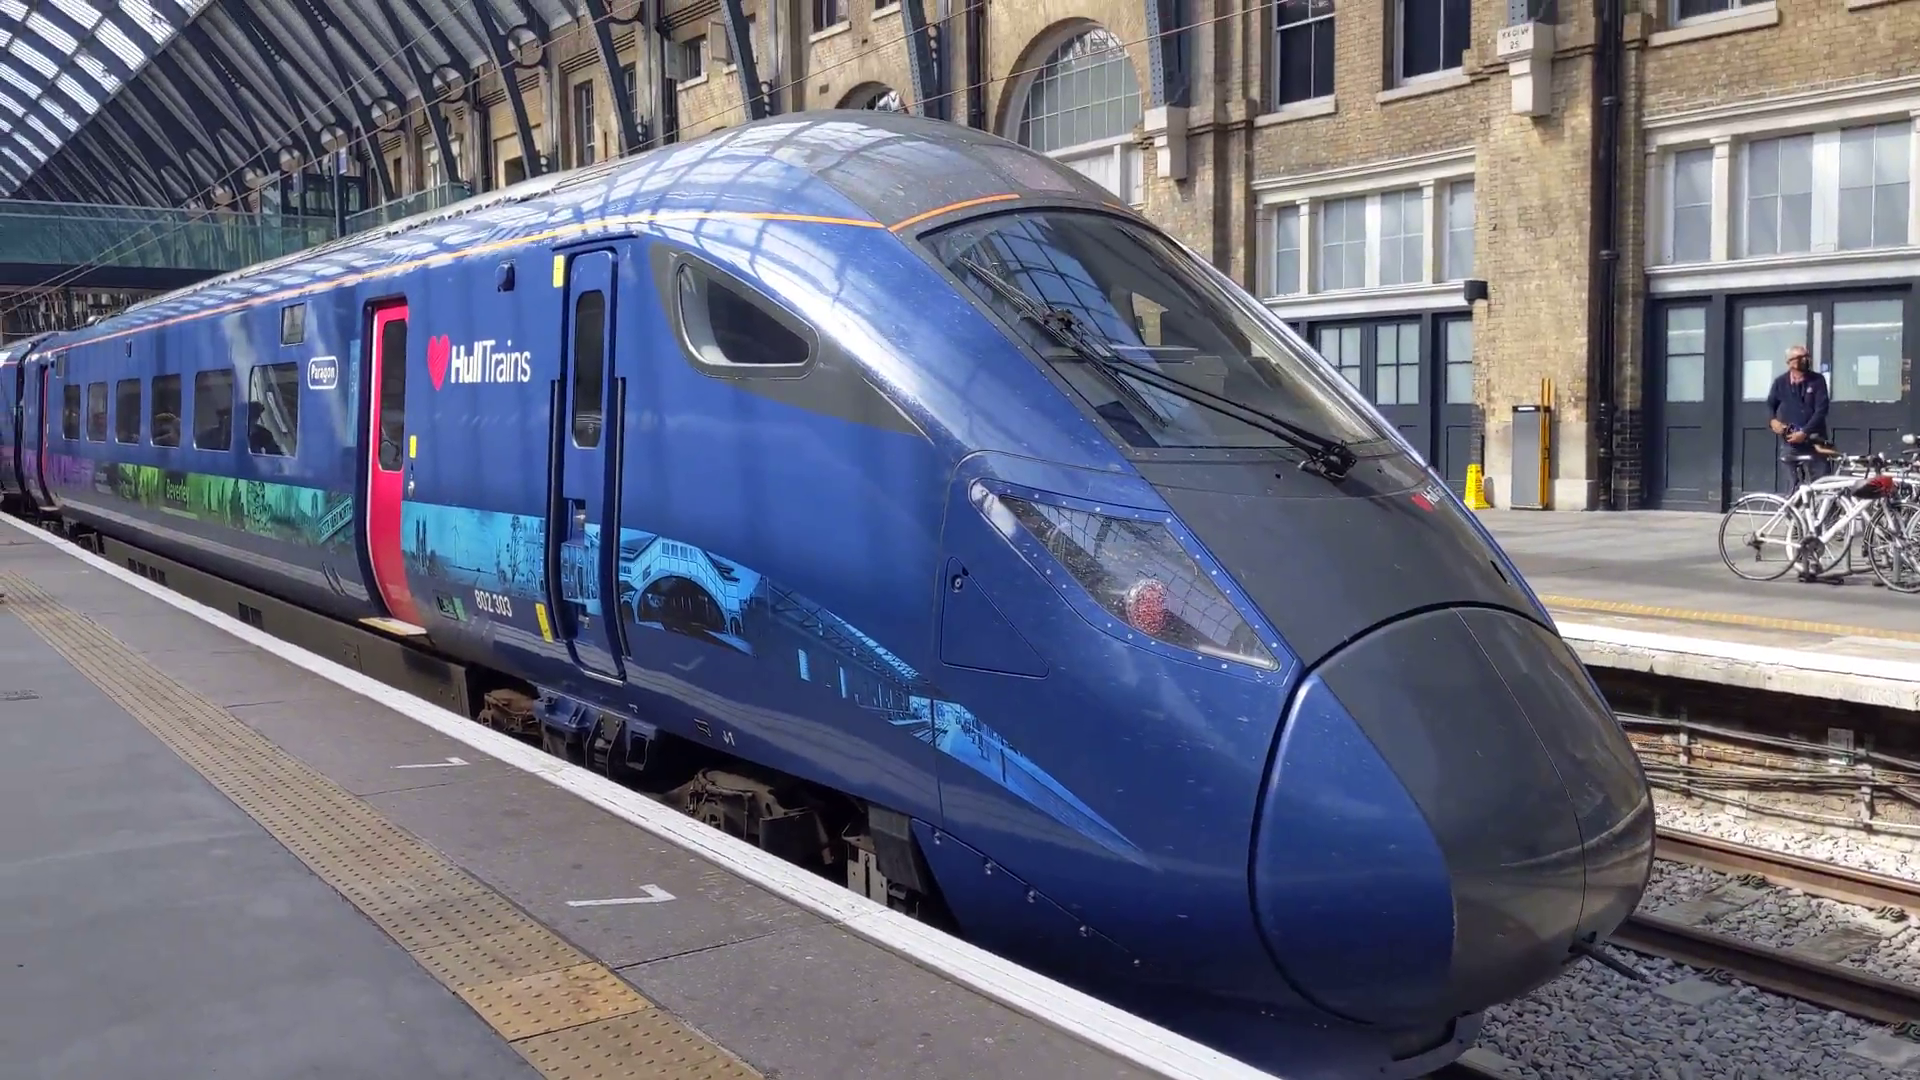 The train is in a Hull Trains livery, which is black on the pointed front of the train. Along the side of the train is a deep blue with a composite image of landmarks around Hull. The doors slide into the side of the train and are bright pink.